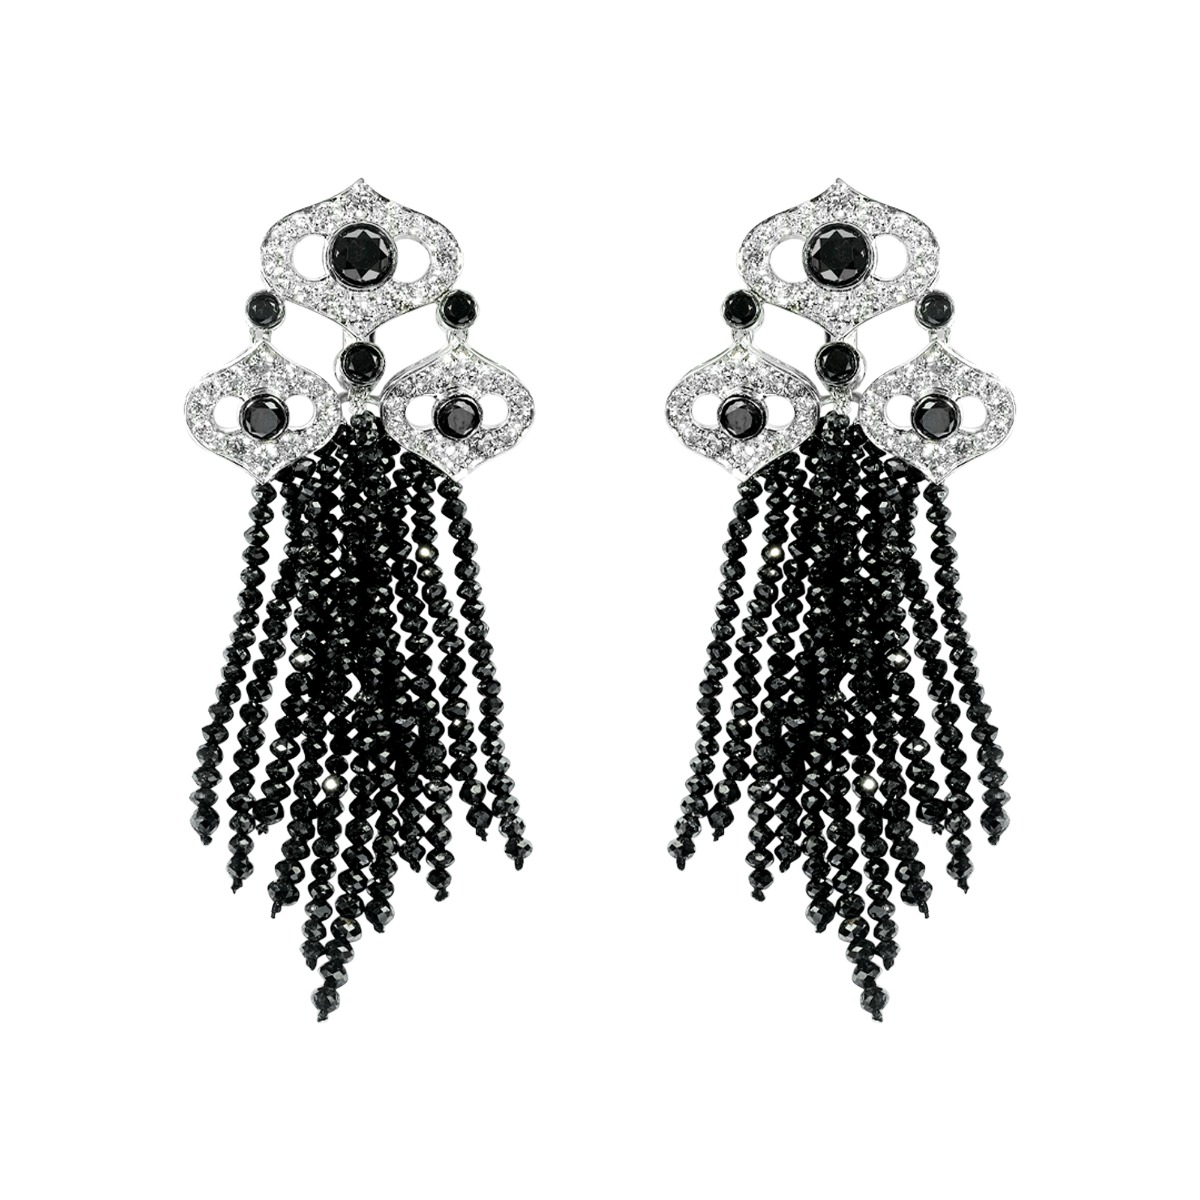 Indian Style White Diamond Earrings with Black Diamond Strands 